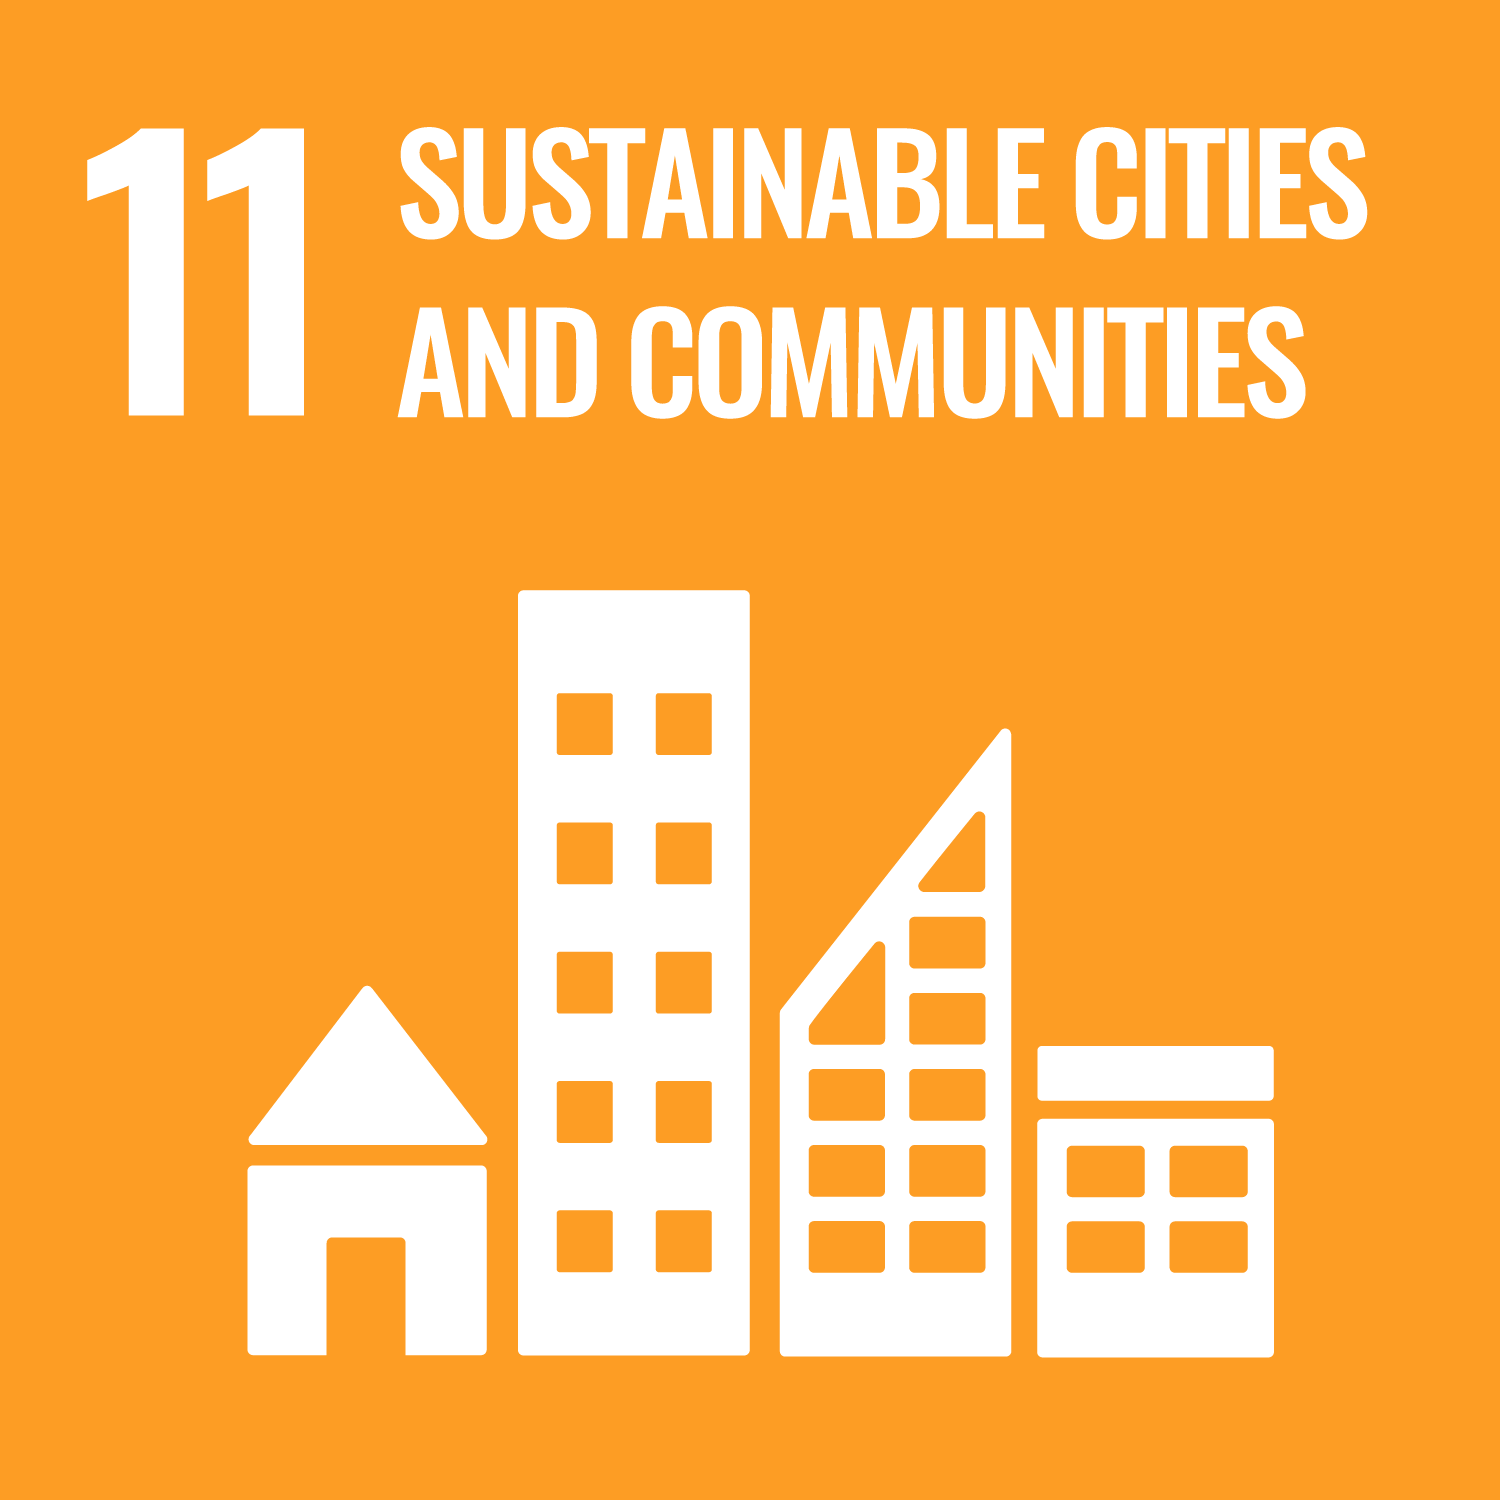 United Nations SDG goals for sustainable Cities and Communities